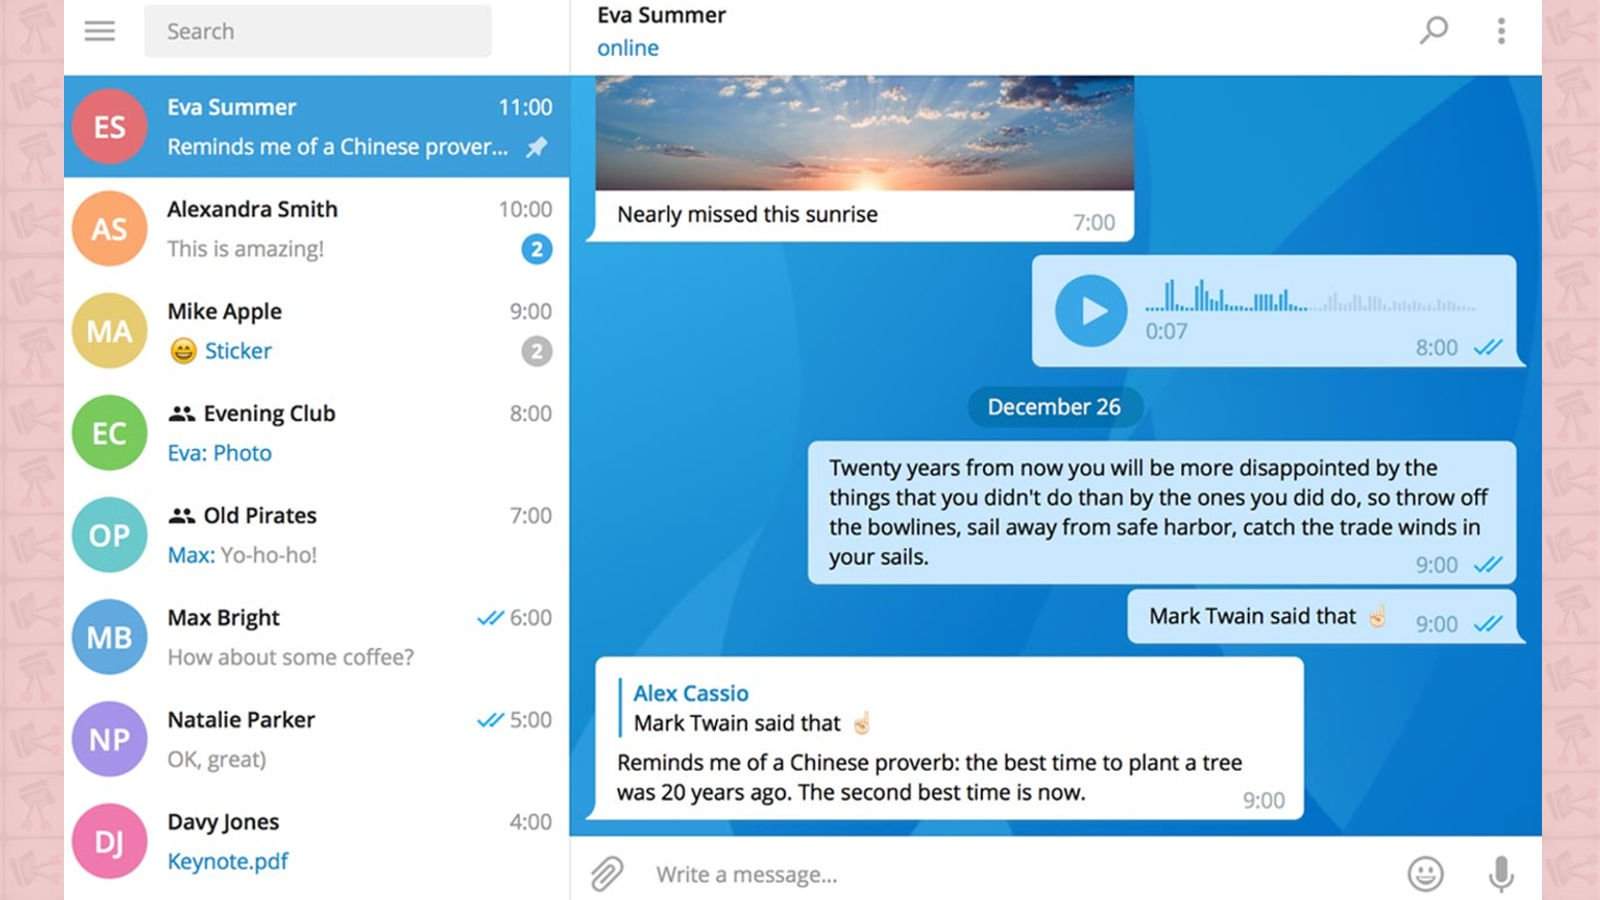 Telegram Desktop App Hits Version 1.0 with New Design and Features